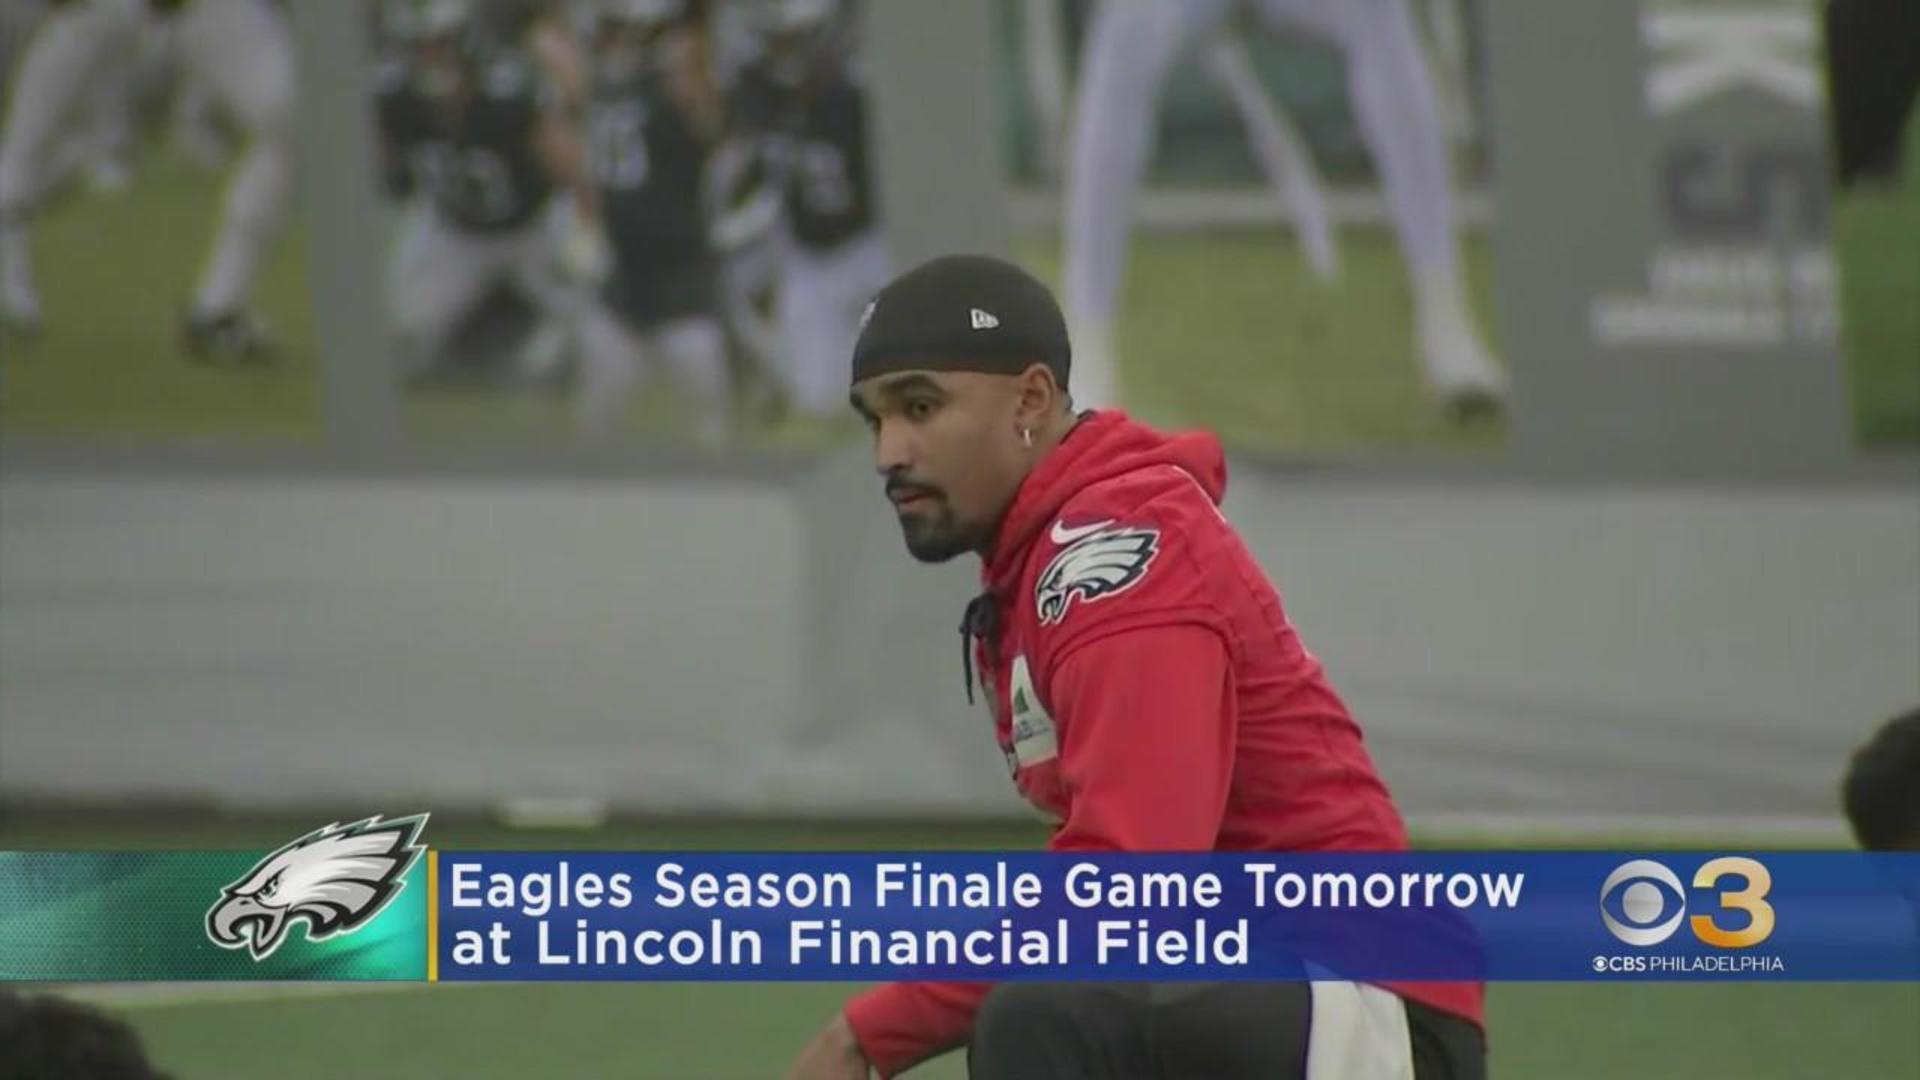 Can Eagles clinch 1st seed against Giants at home? - CBS Philadelphia